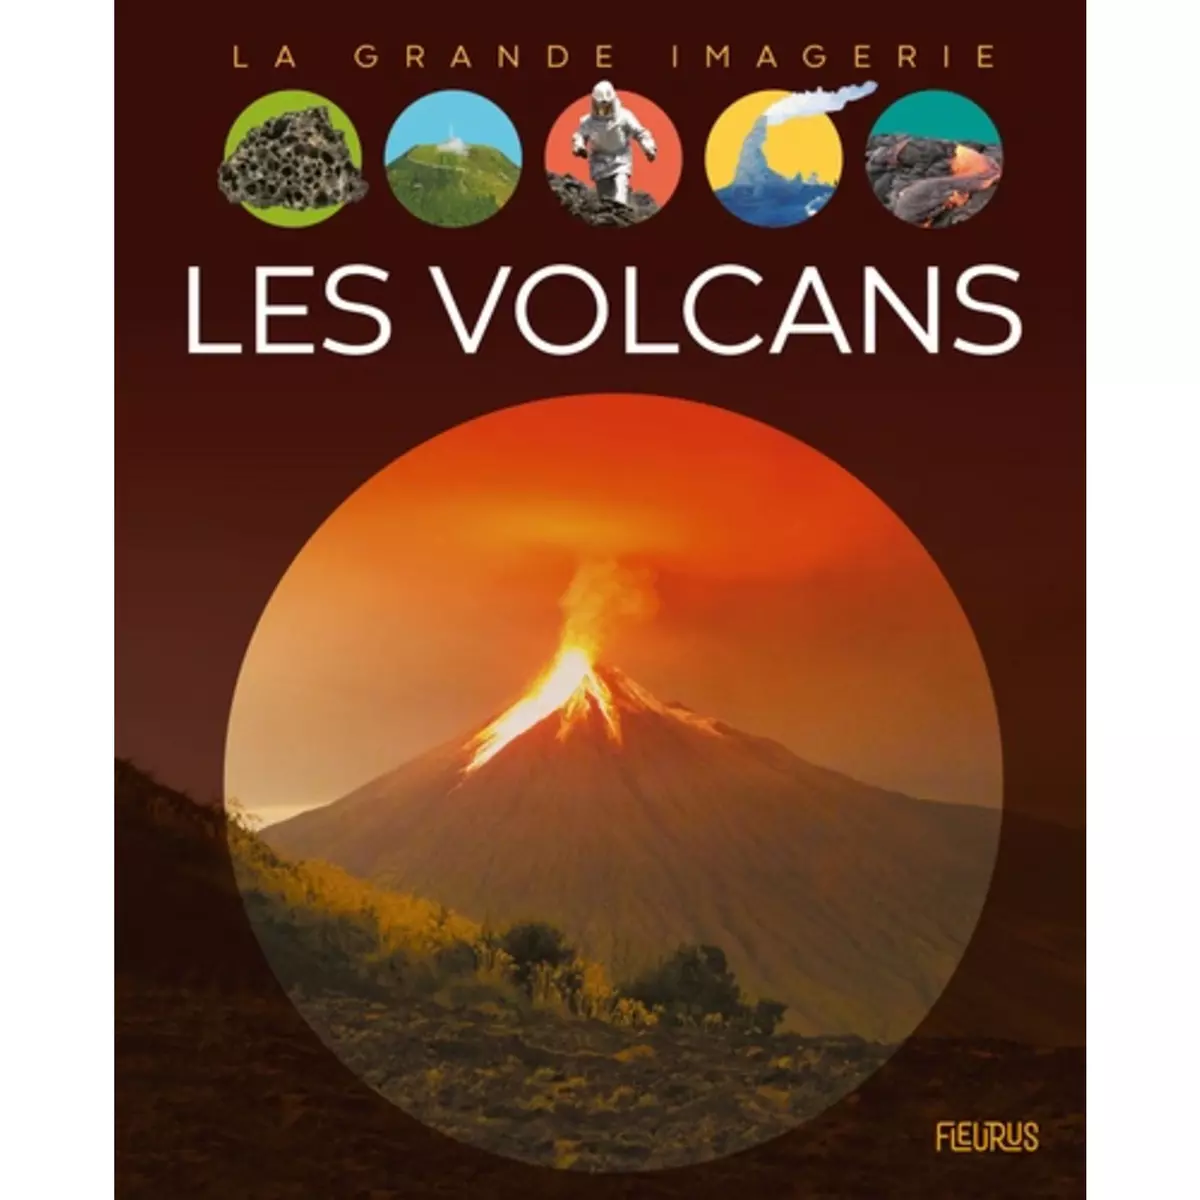  LES VOLCANS, Franco Cathy